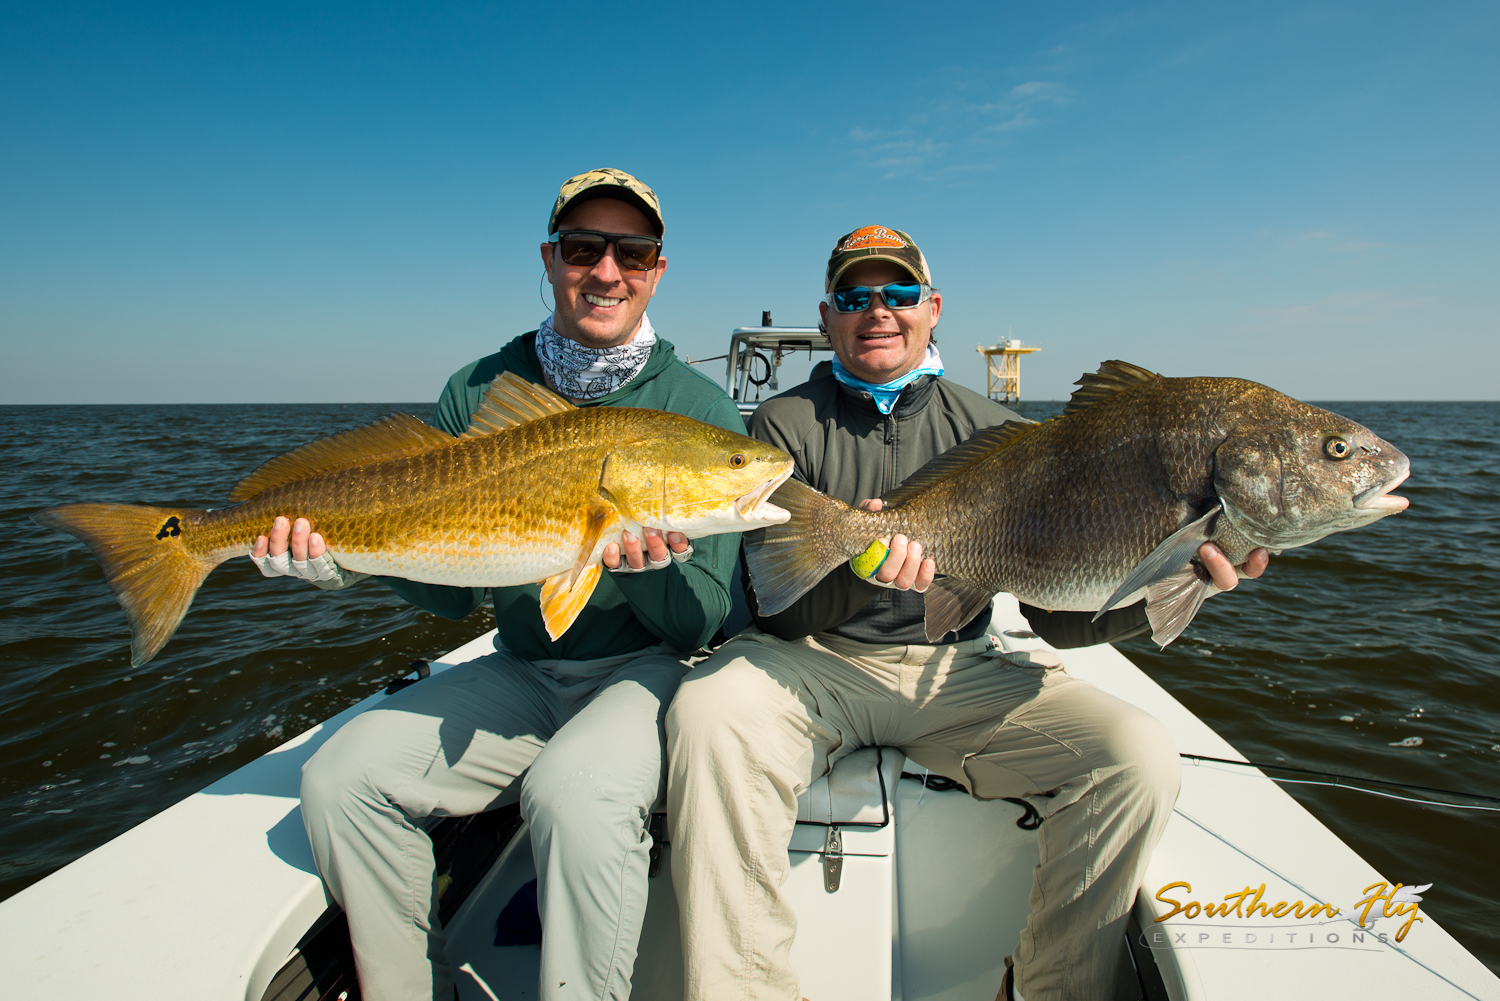 2016-11-13-15_SouthernFlyExpeditions_WesWillard_and_JacobKing-11.jpg